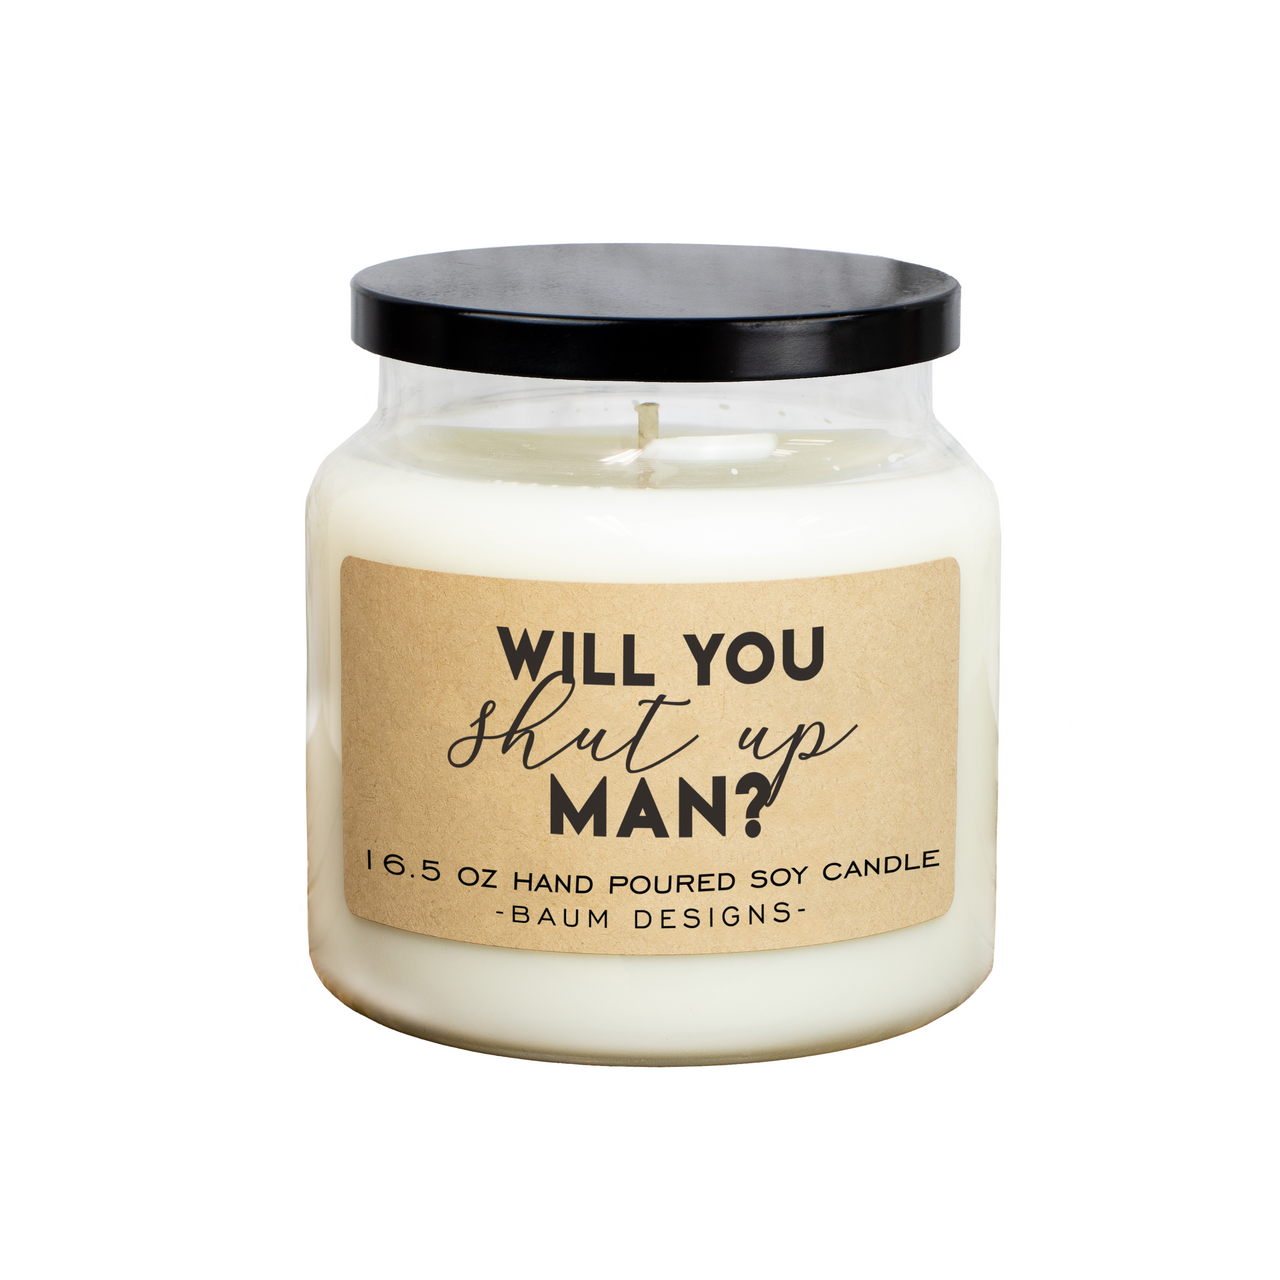 Will You Shut Up Man? Soy Candle